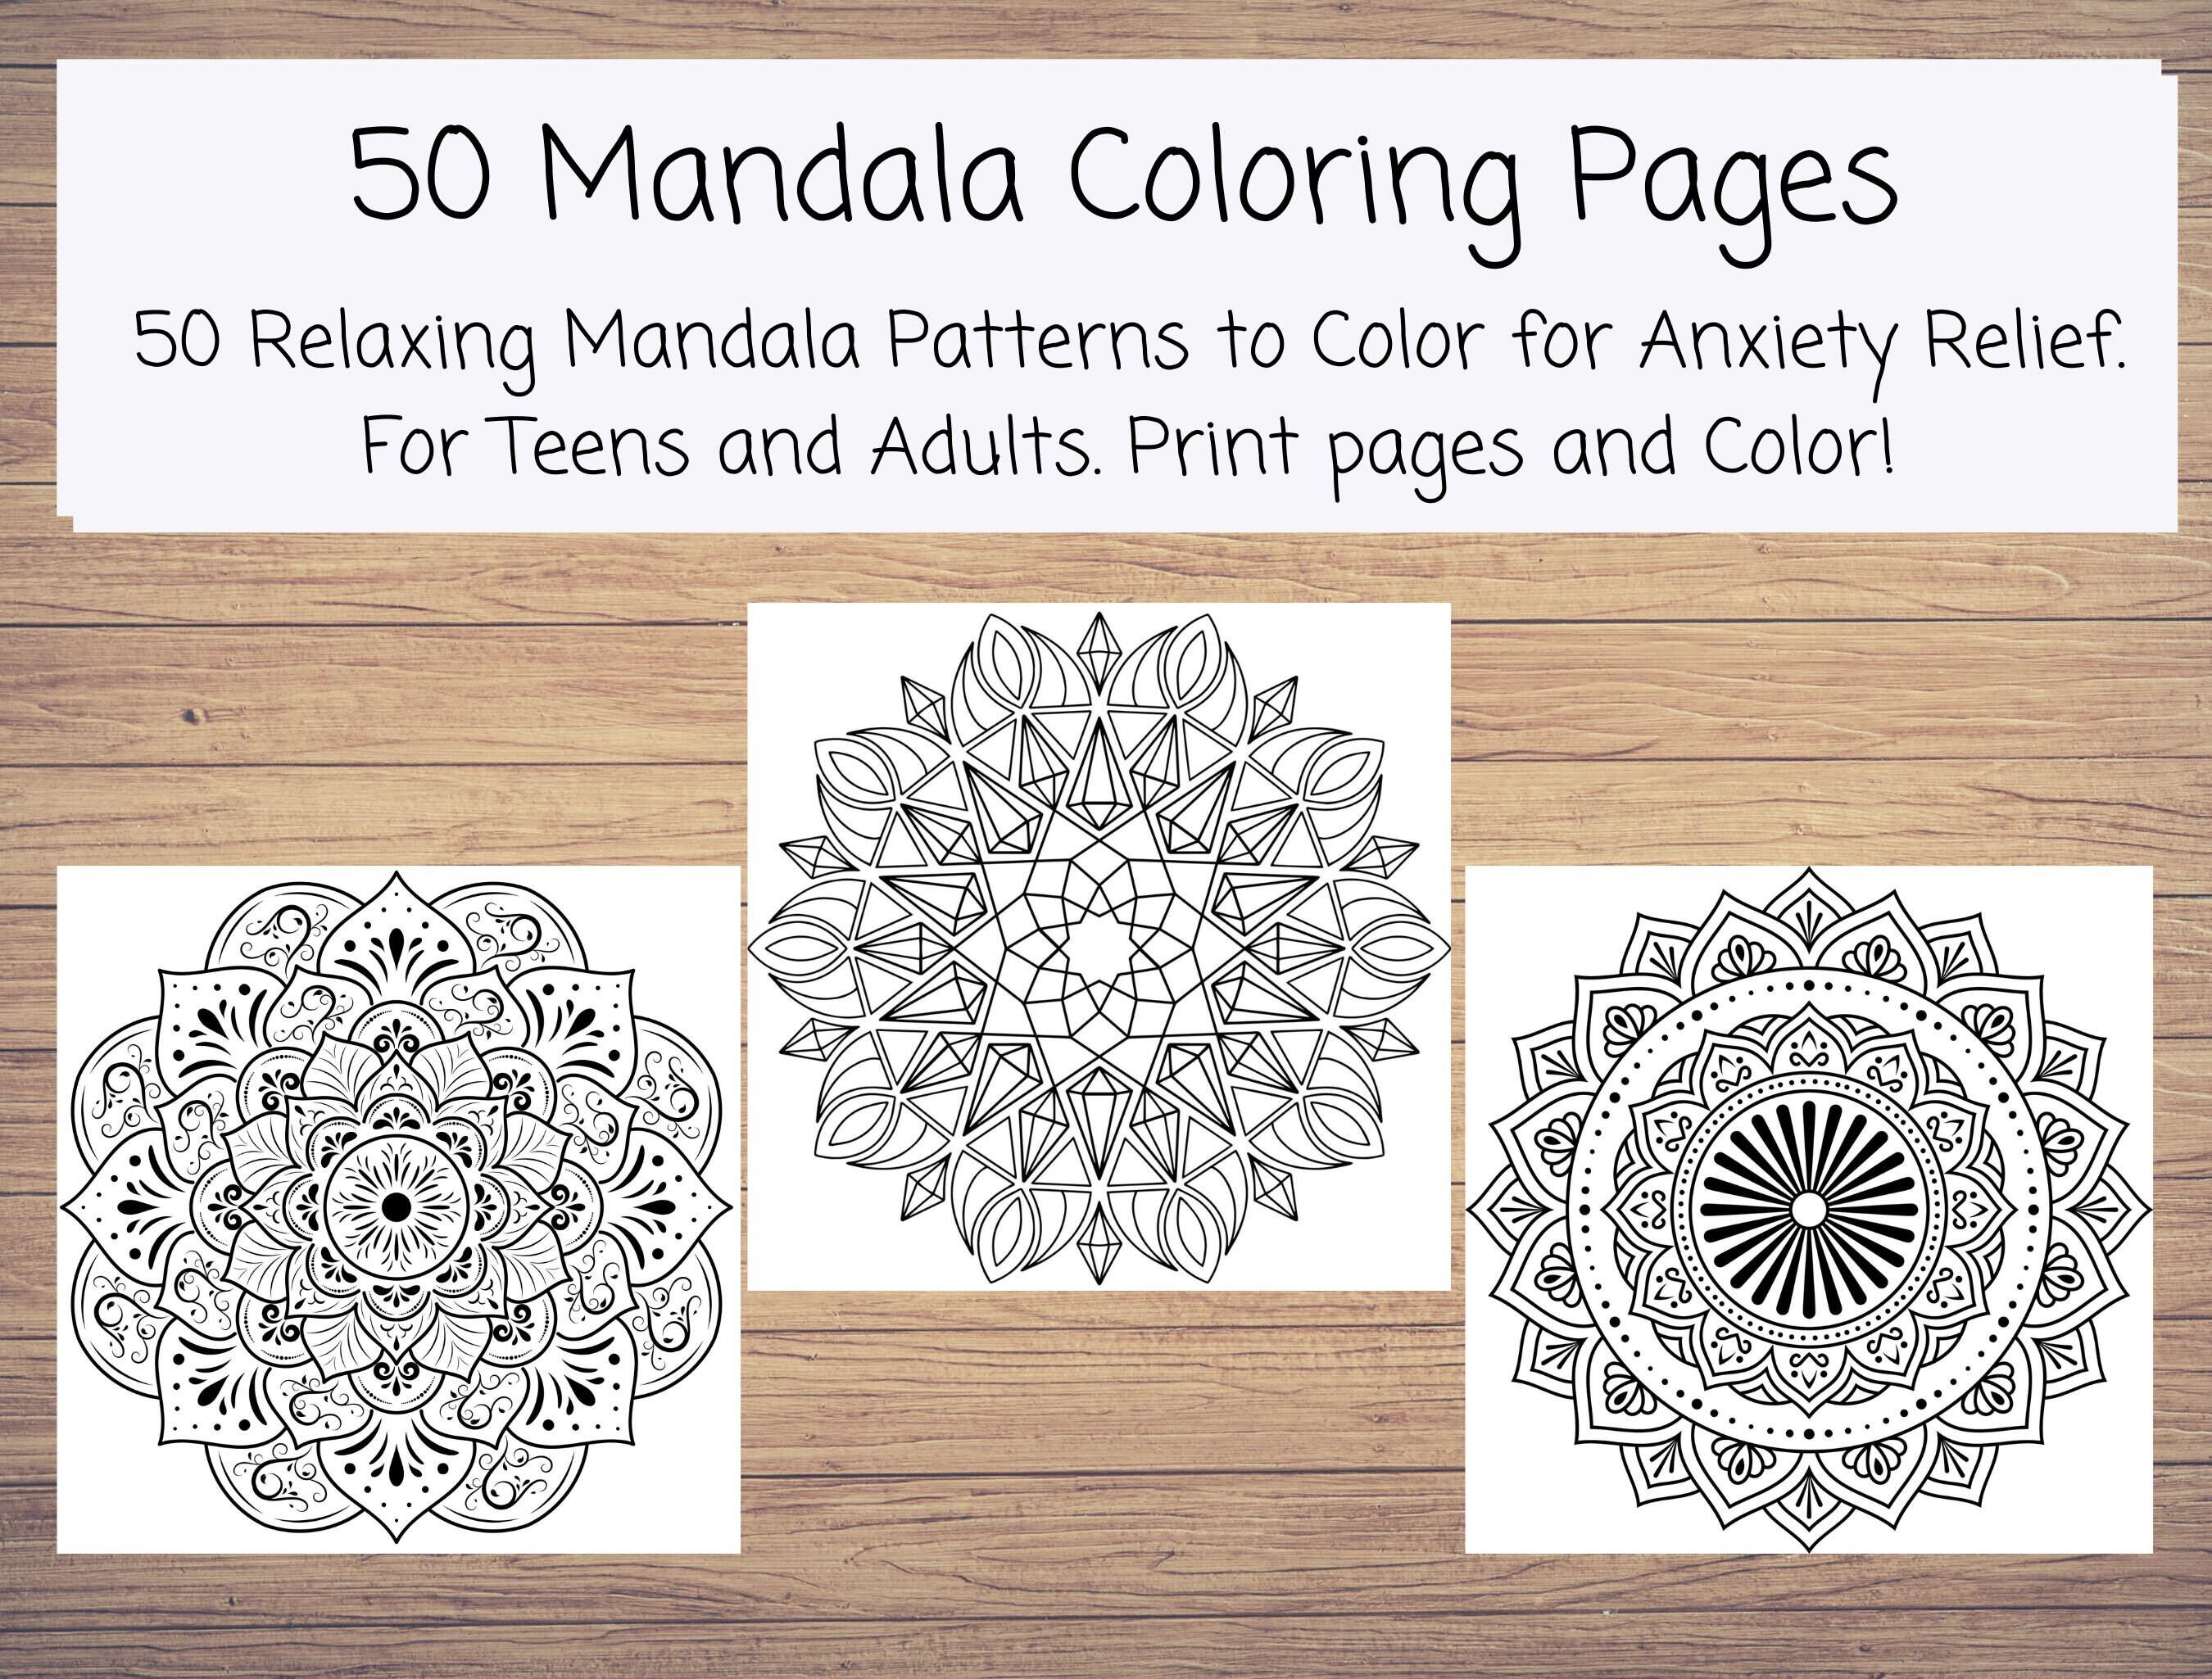 Magical Mandalas Pattern Adult Coloring Book: An Adult Coloring Book Stress  Relieving Design Featuring Easy, Fun and Relaxing Mandala Coloring Pages  for Adult Relaxation. (Paperback) 